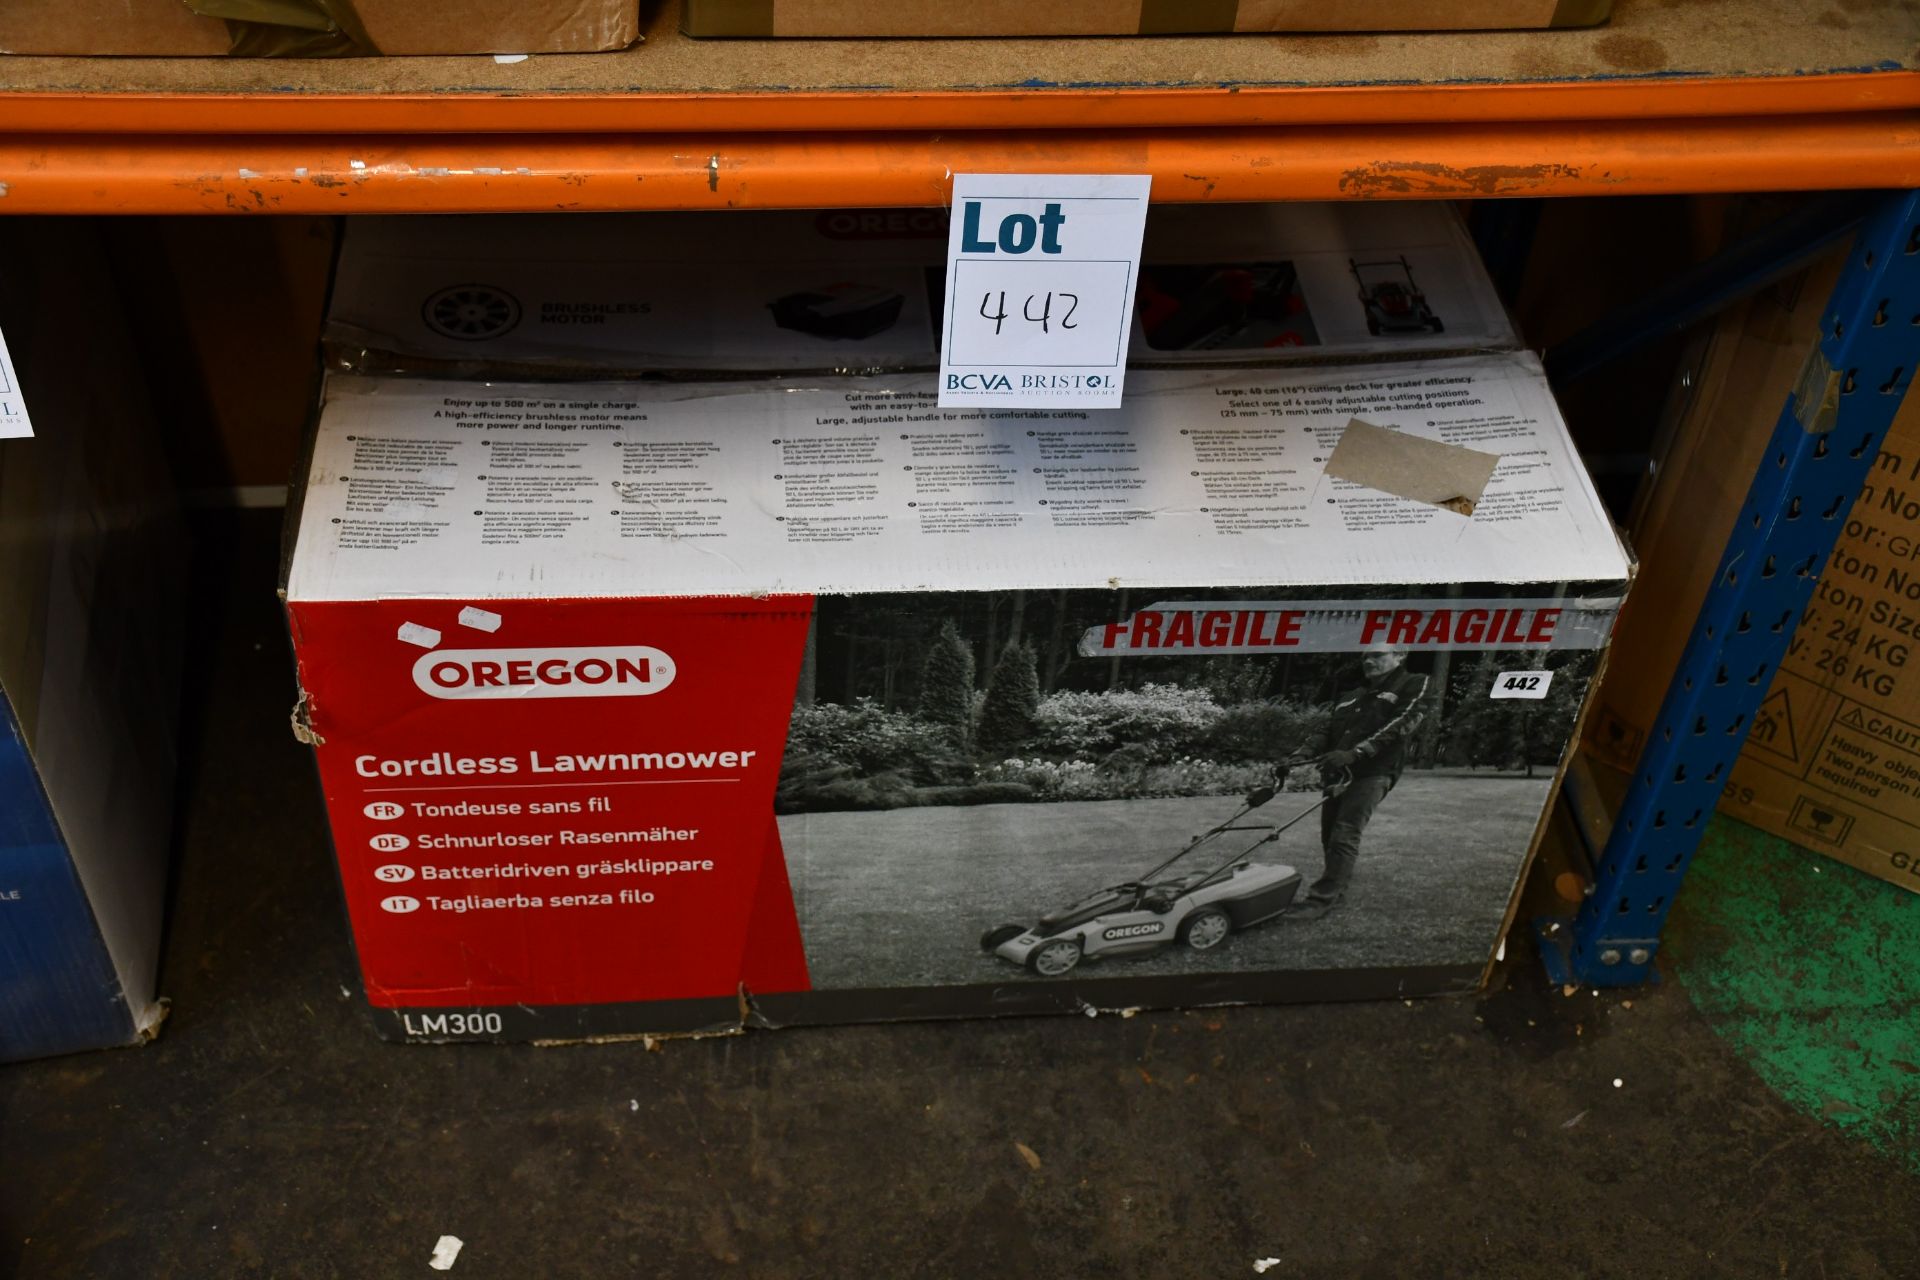 One boxed Oregon LM300 Cordless Lawnmower.